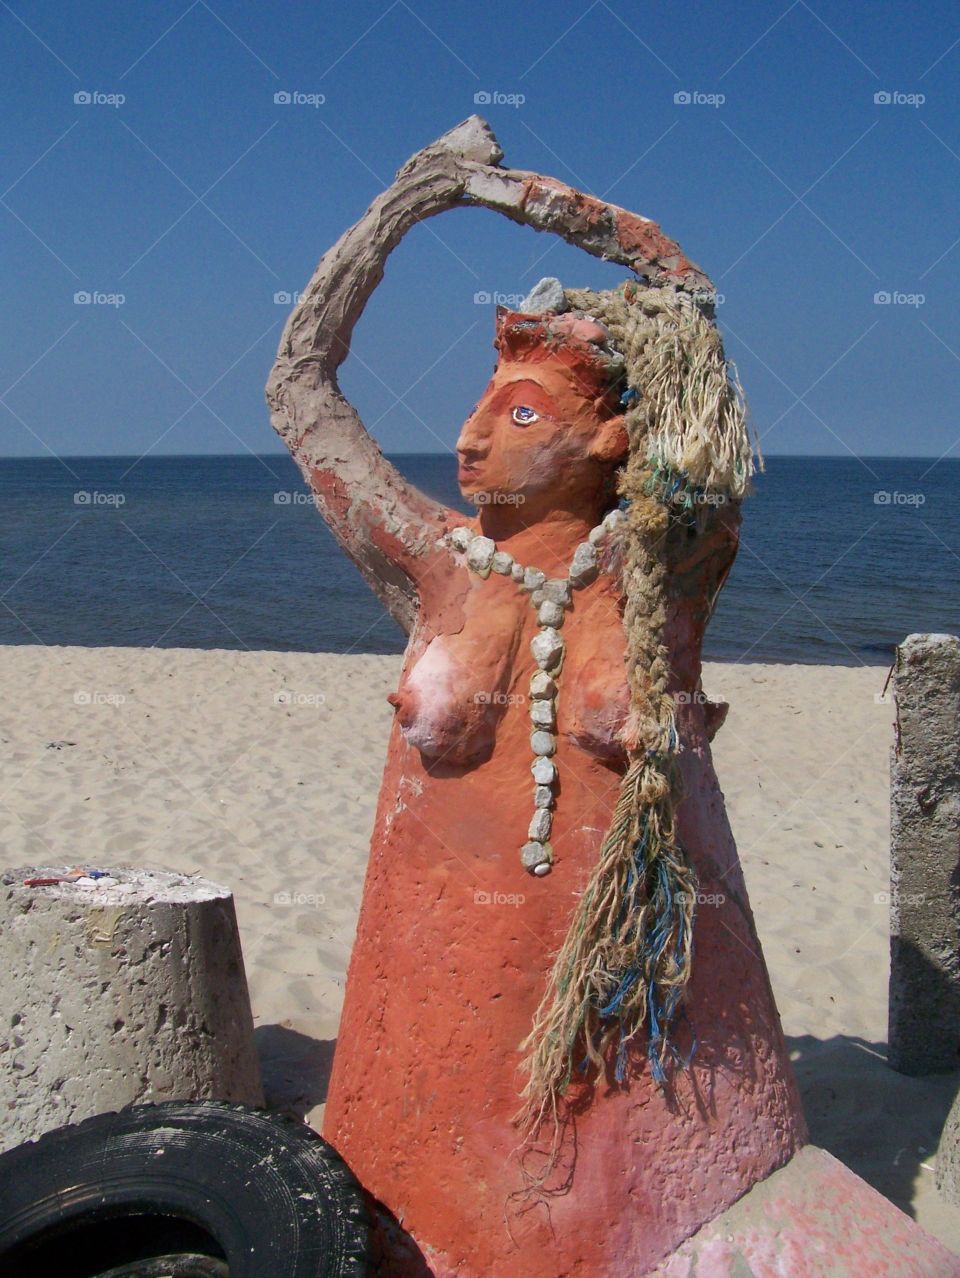 Sculpture of a woman on a beach by the sea 